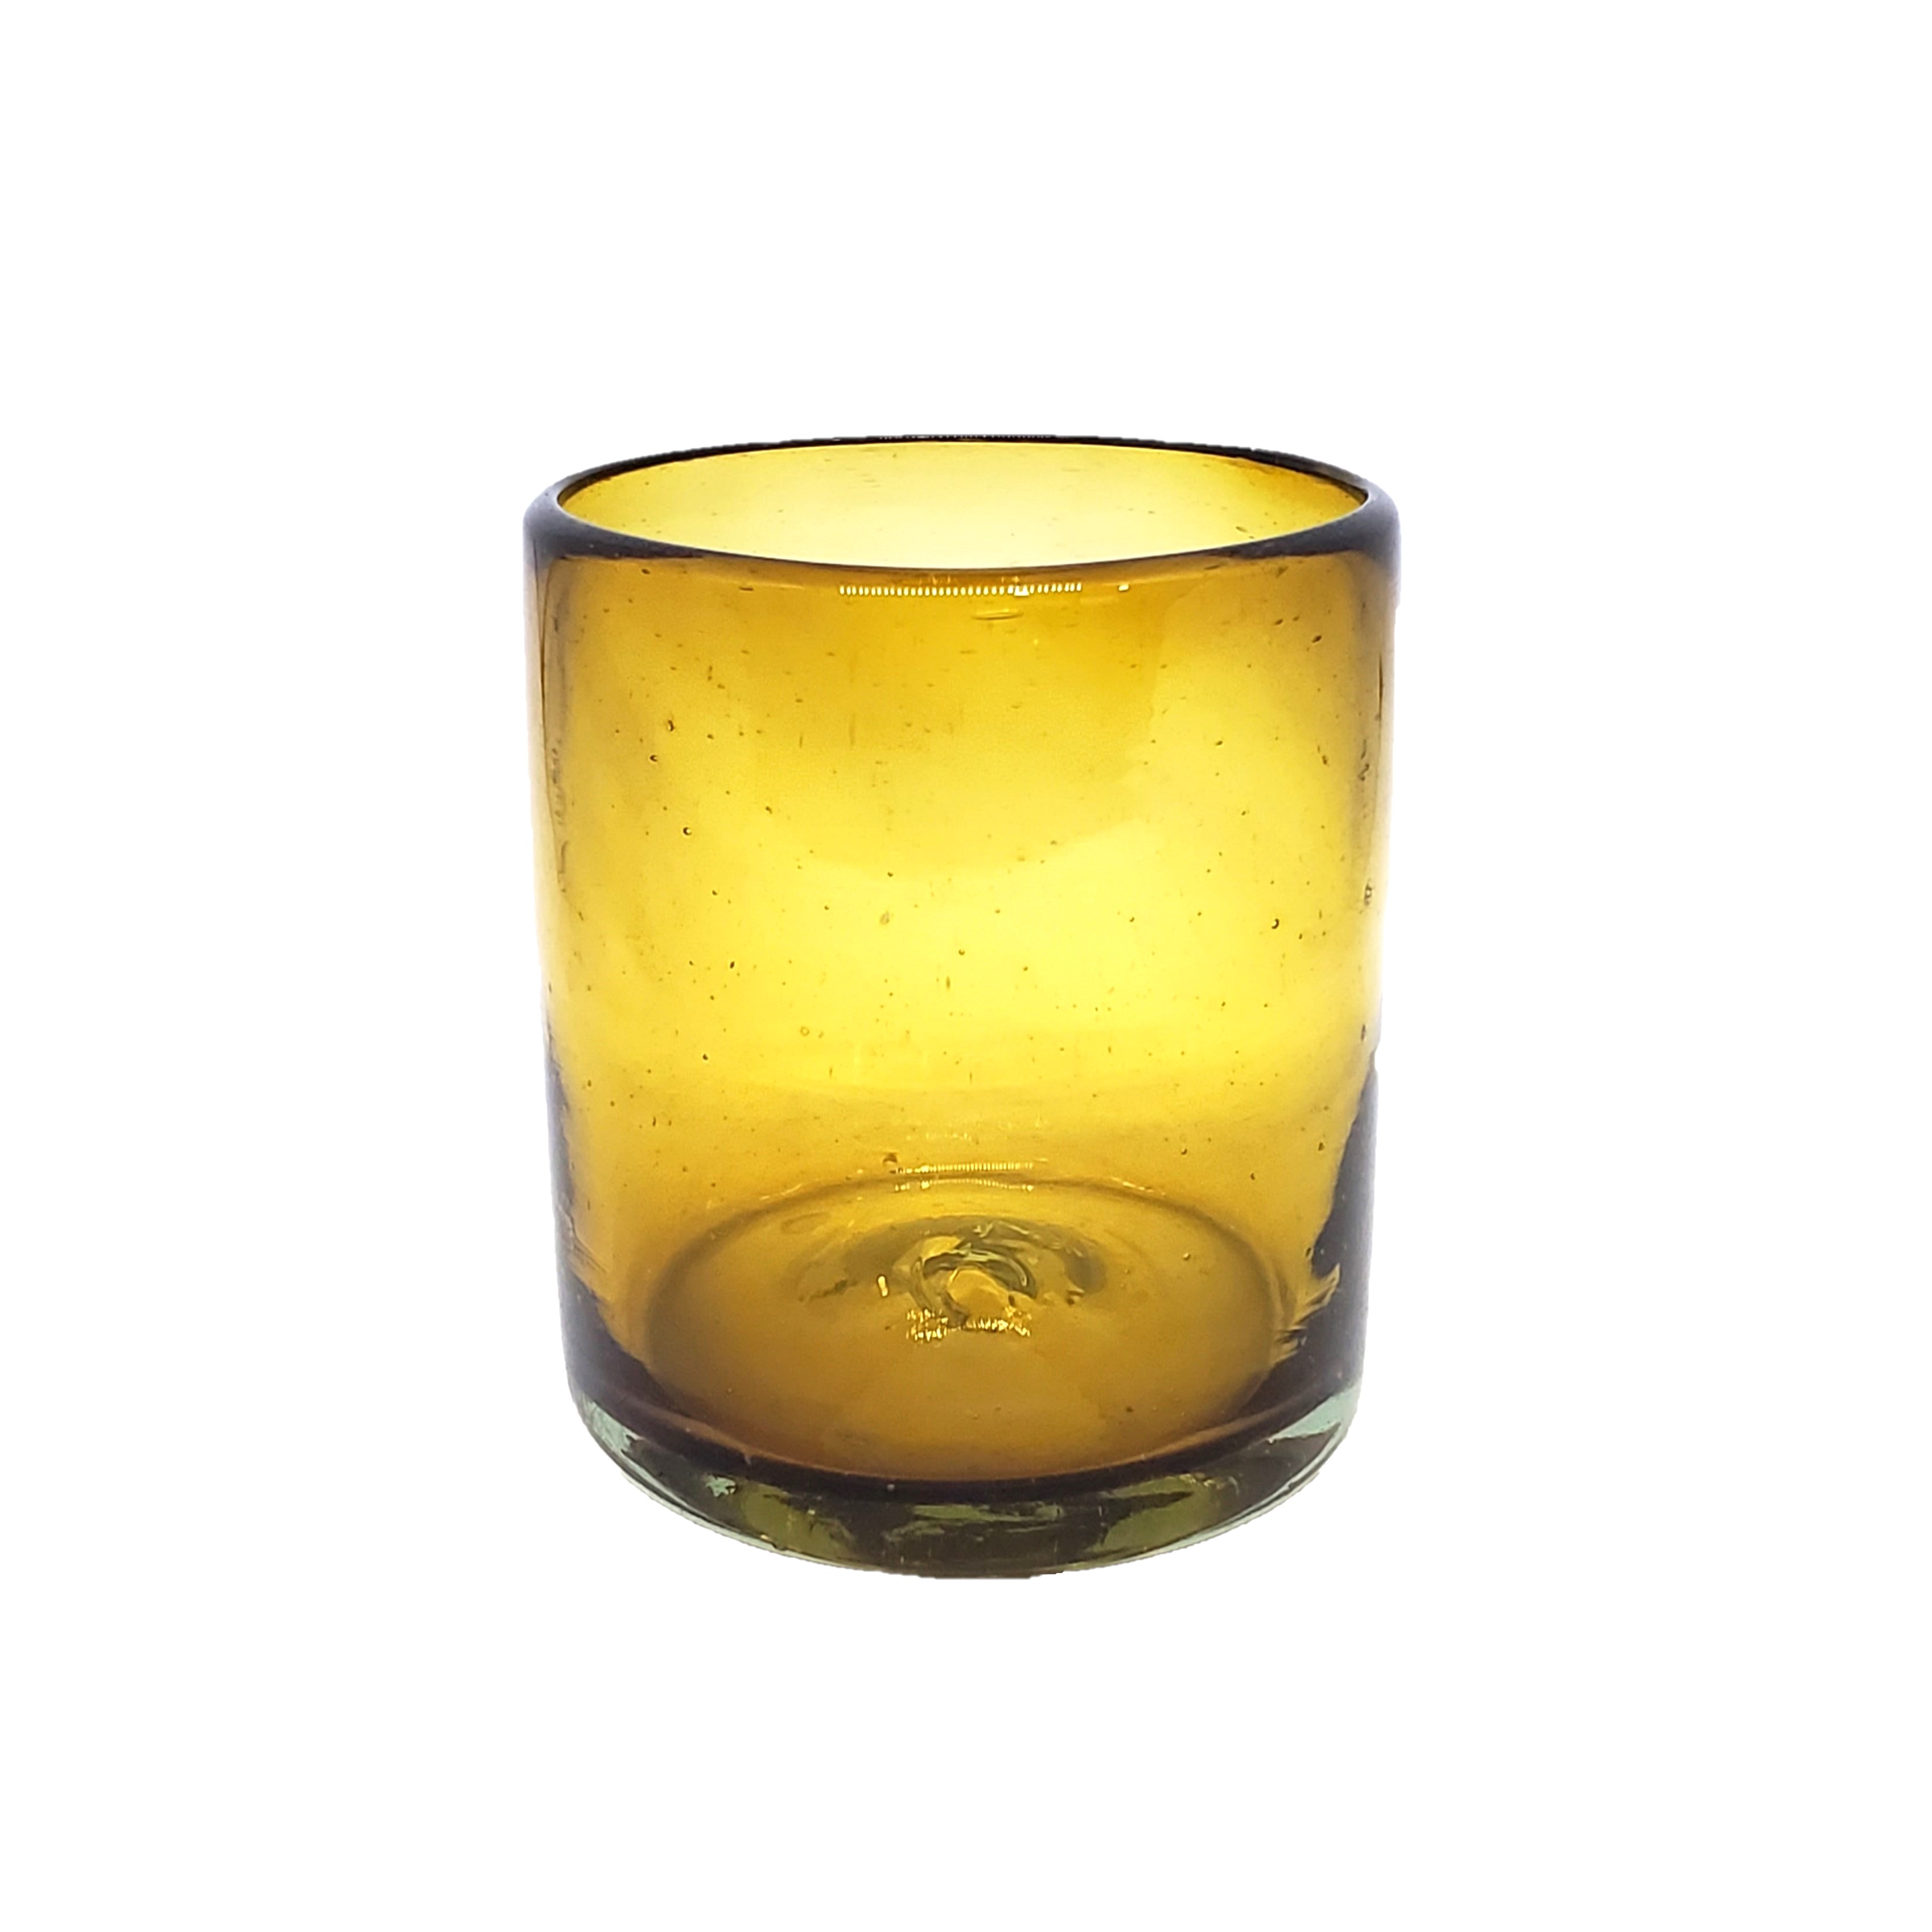 Wholesale MEXICAN GLASSWARE / Solid Amber 9 oz Short Tumblers  / Enhance your favorite drink with these colorful handcrafted glasses.